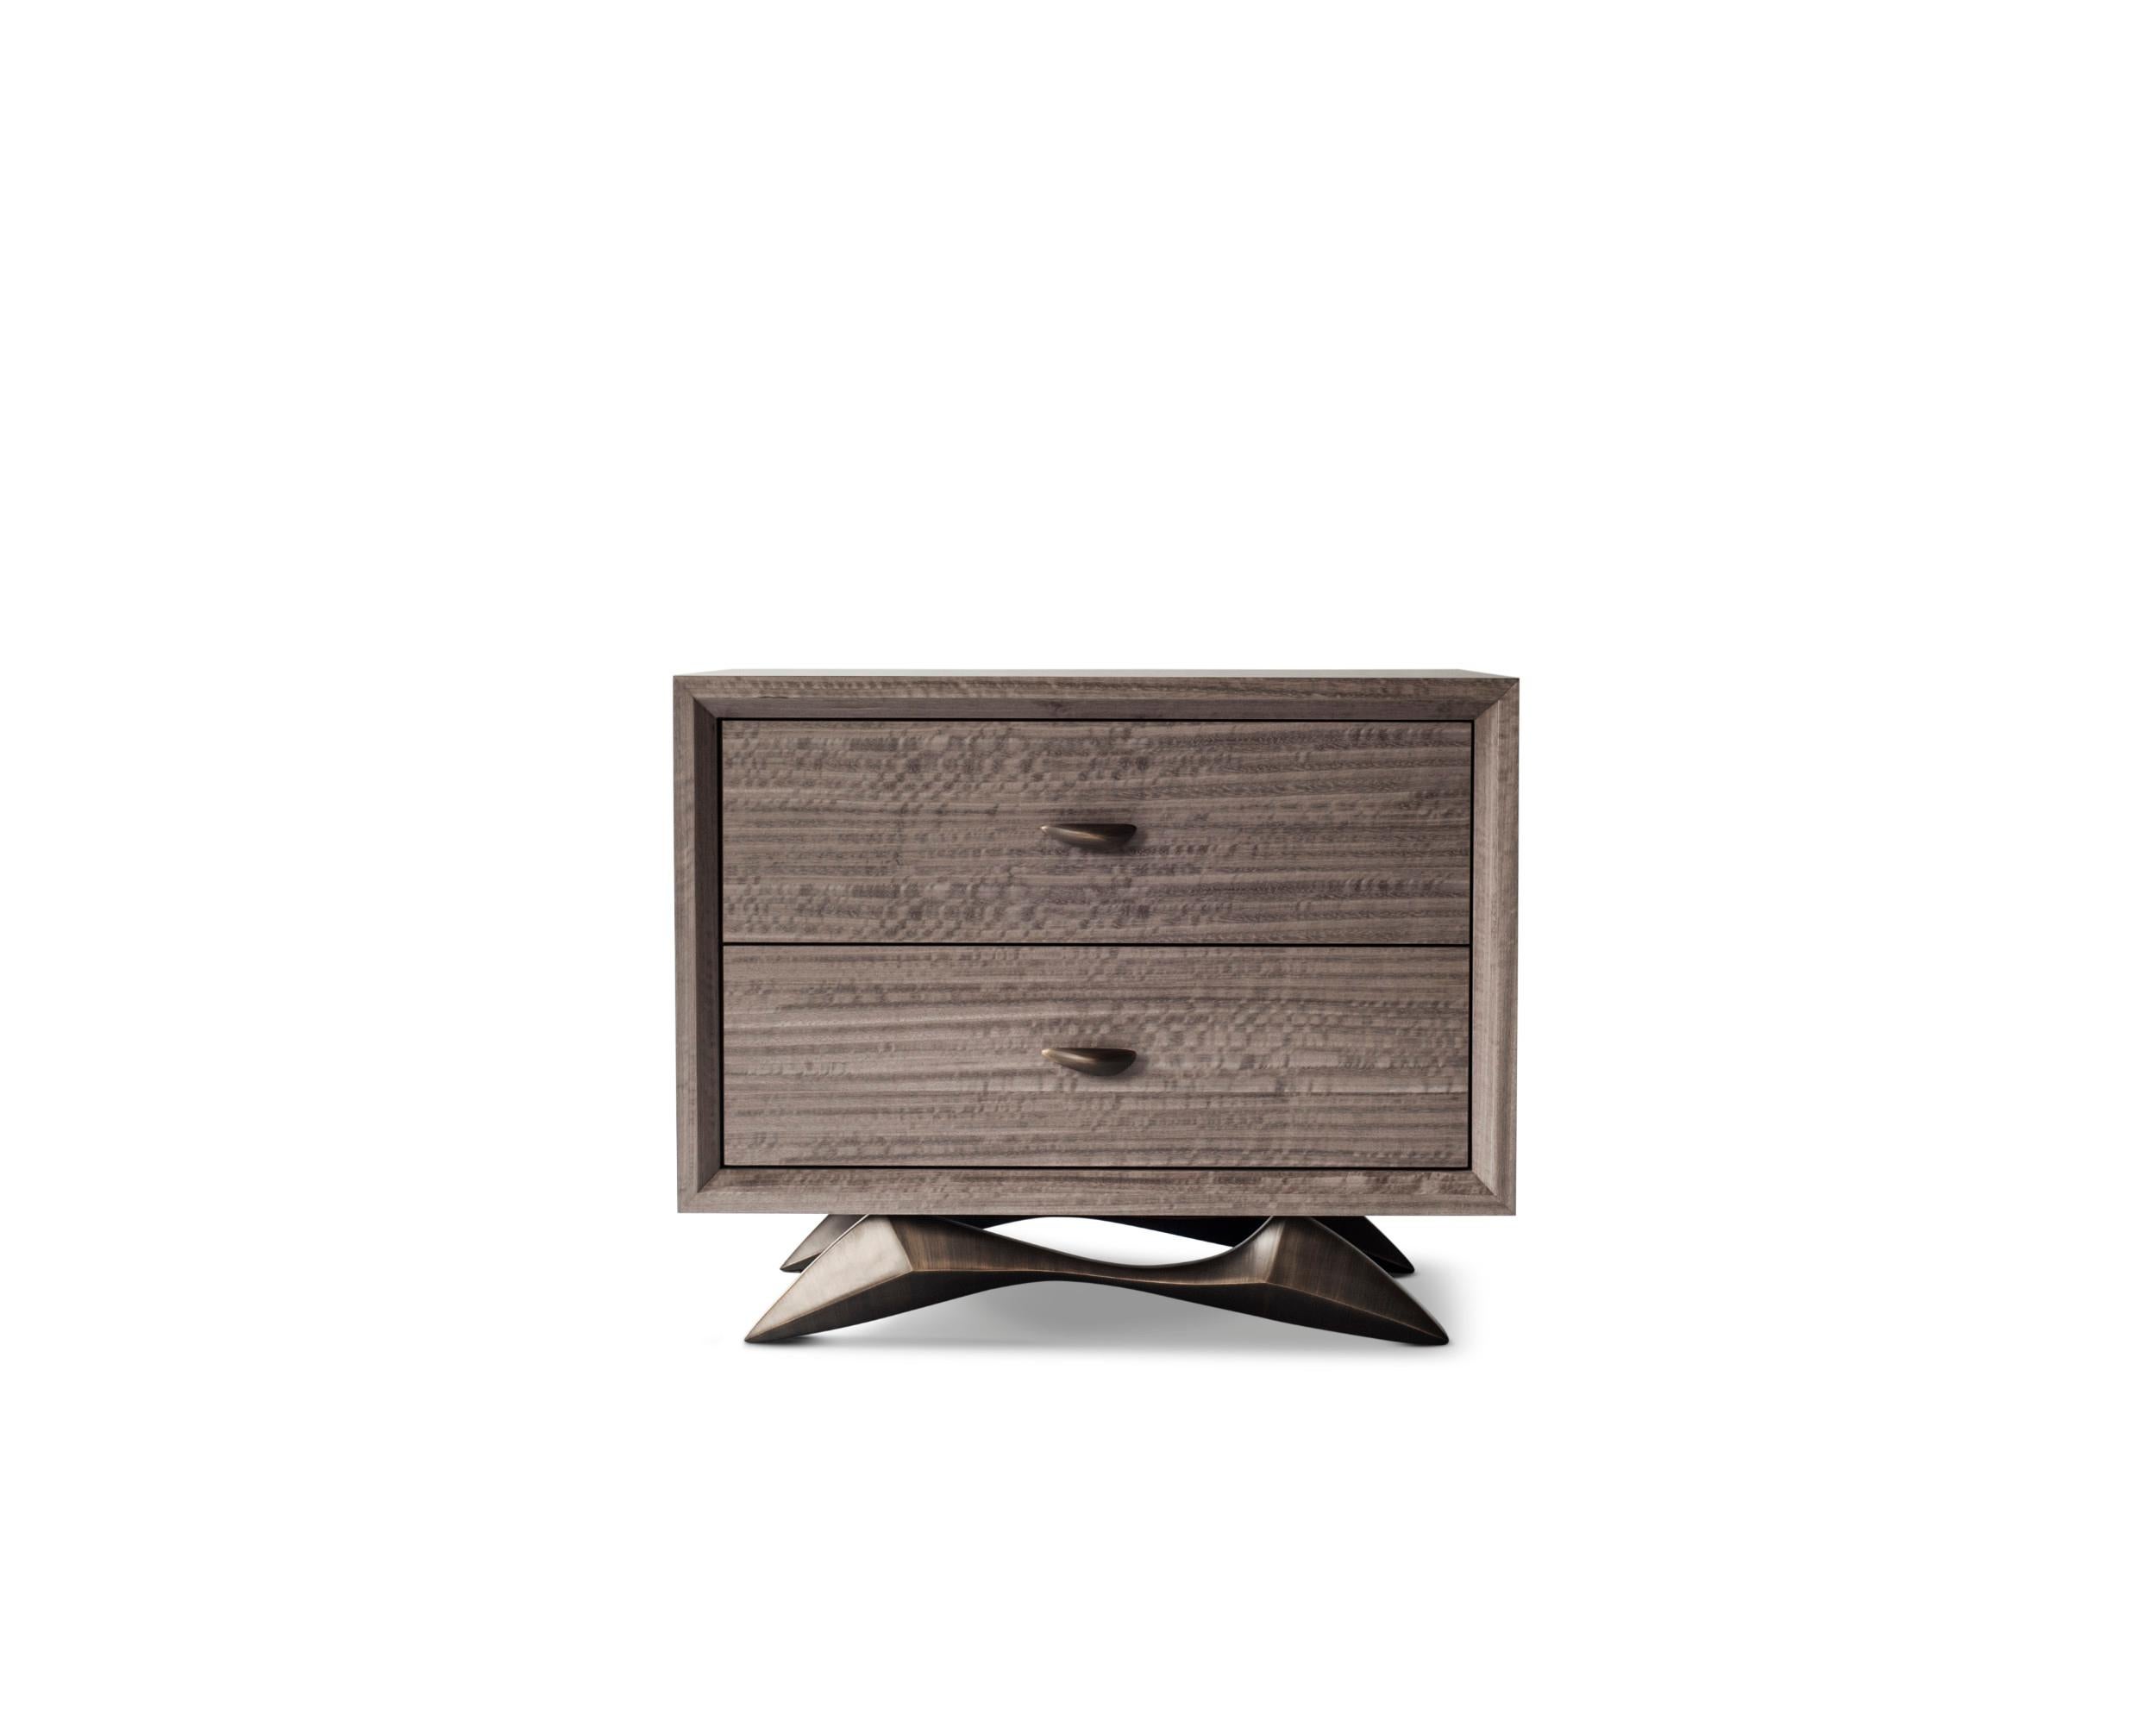 Indian Bevel Bedside Table by DeMuro Das